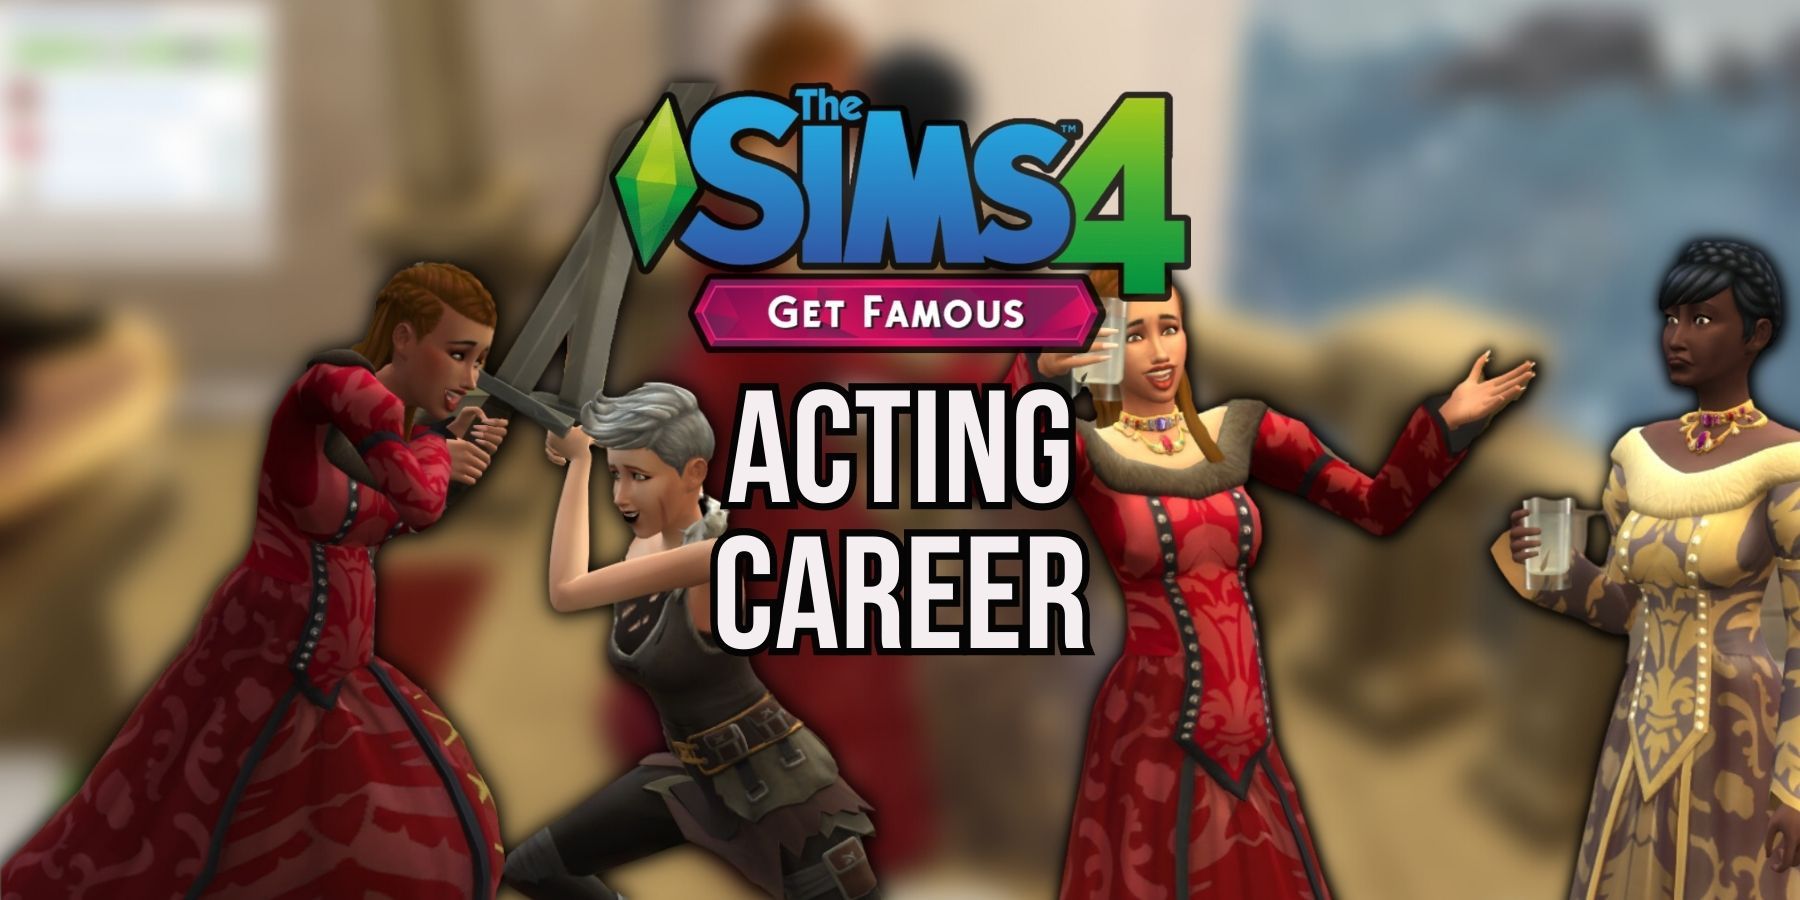 sims 4 get famous utorrent download